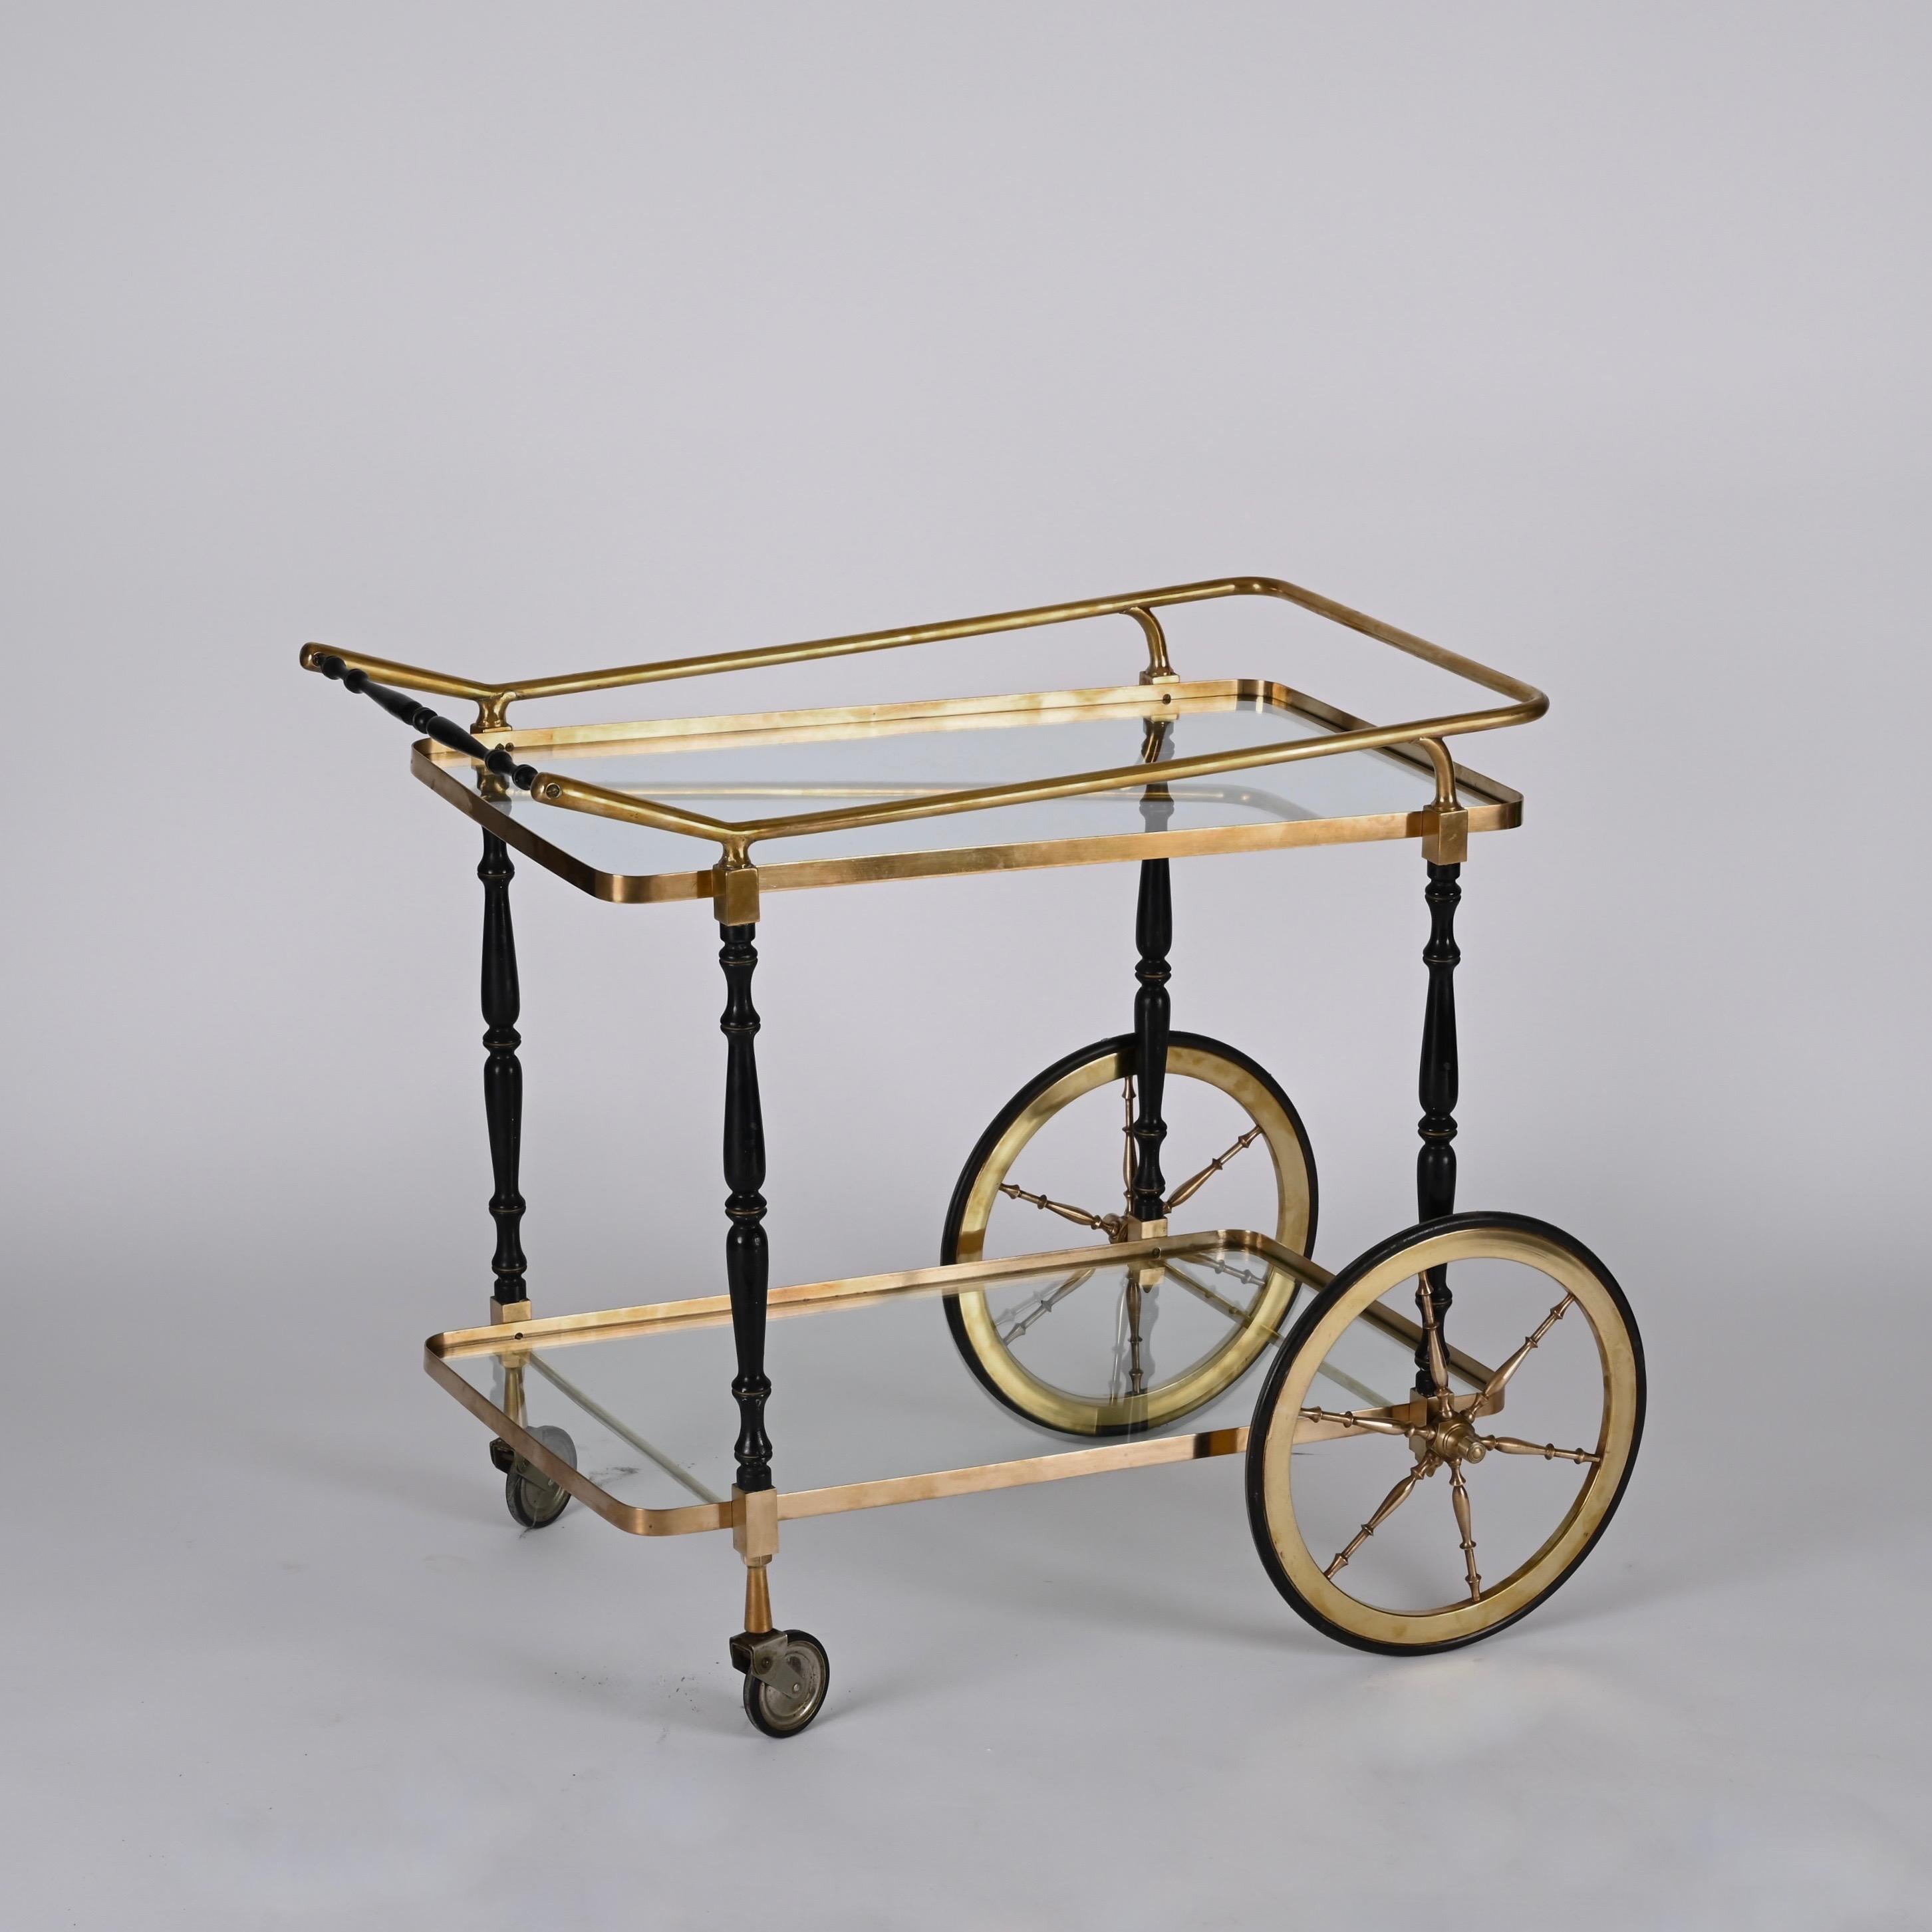 Midcentury Cesare Lacca Brass and Black Lacquer Wood Italian Bar Cart, 1950s For Sale 9